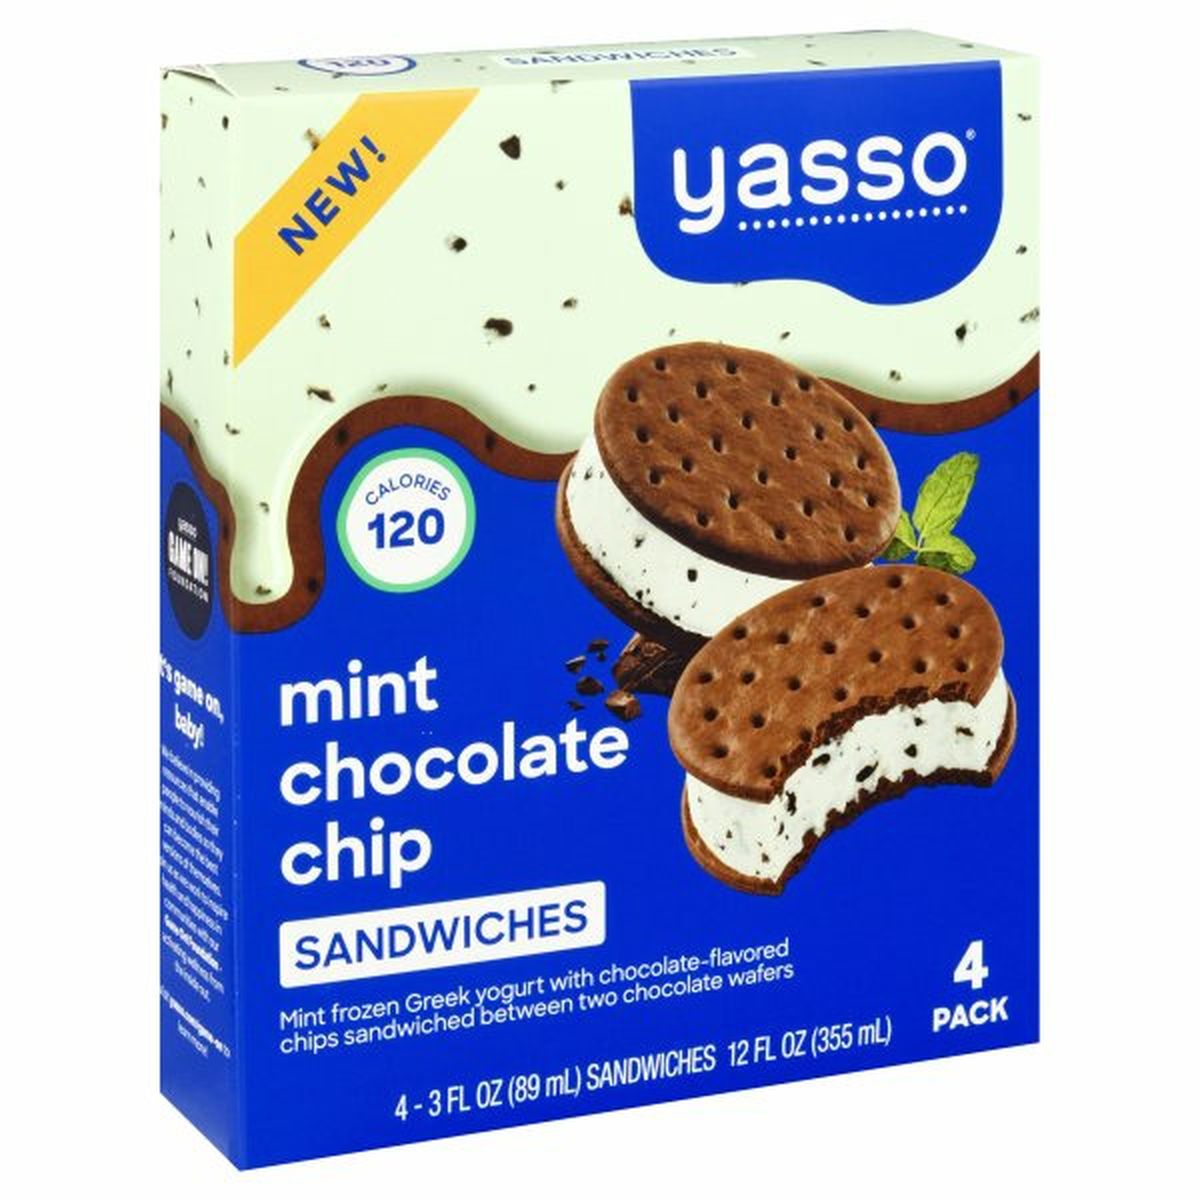 Calories in Yasso Sandwiches, Mint Chocolate Chip, 4 Pack